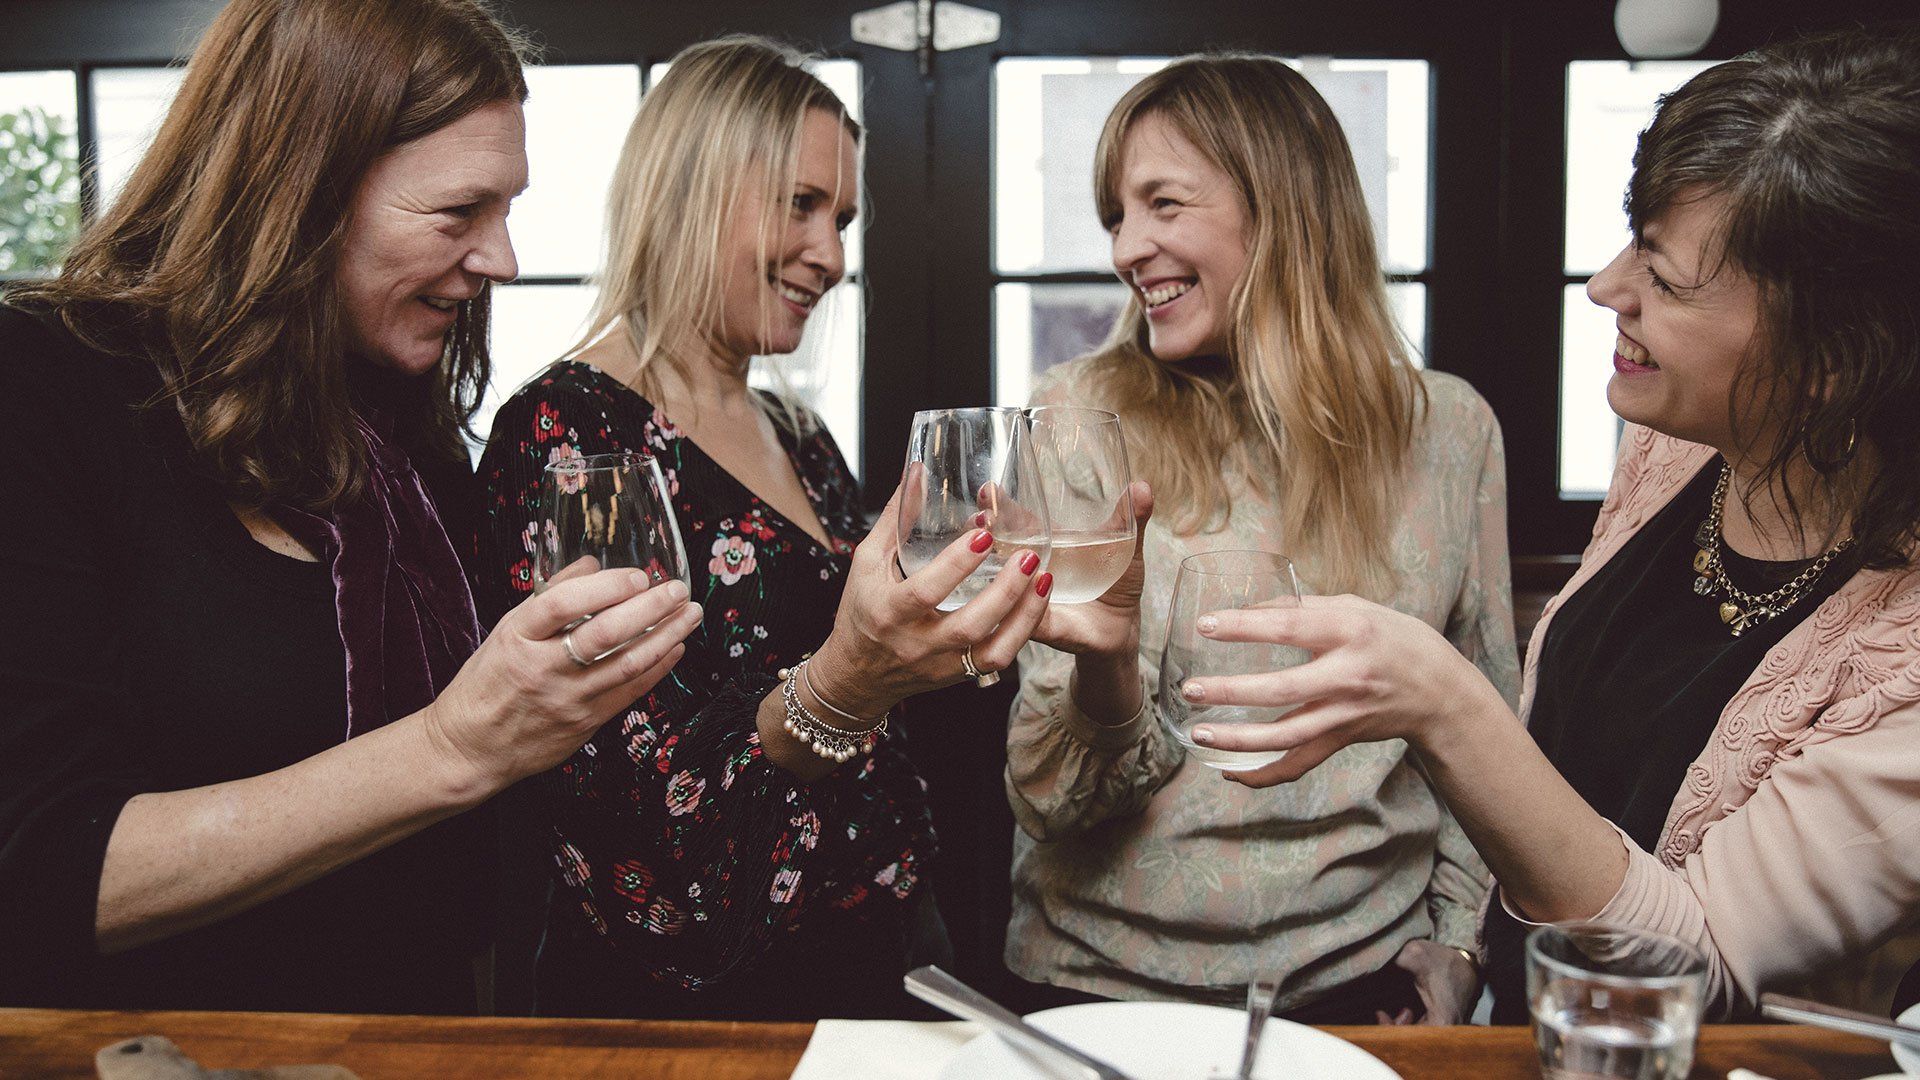 4 females toasting in a restaurant